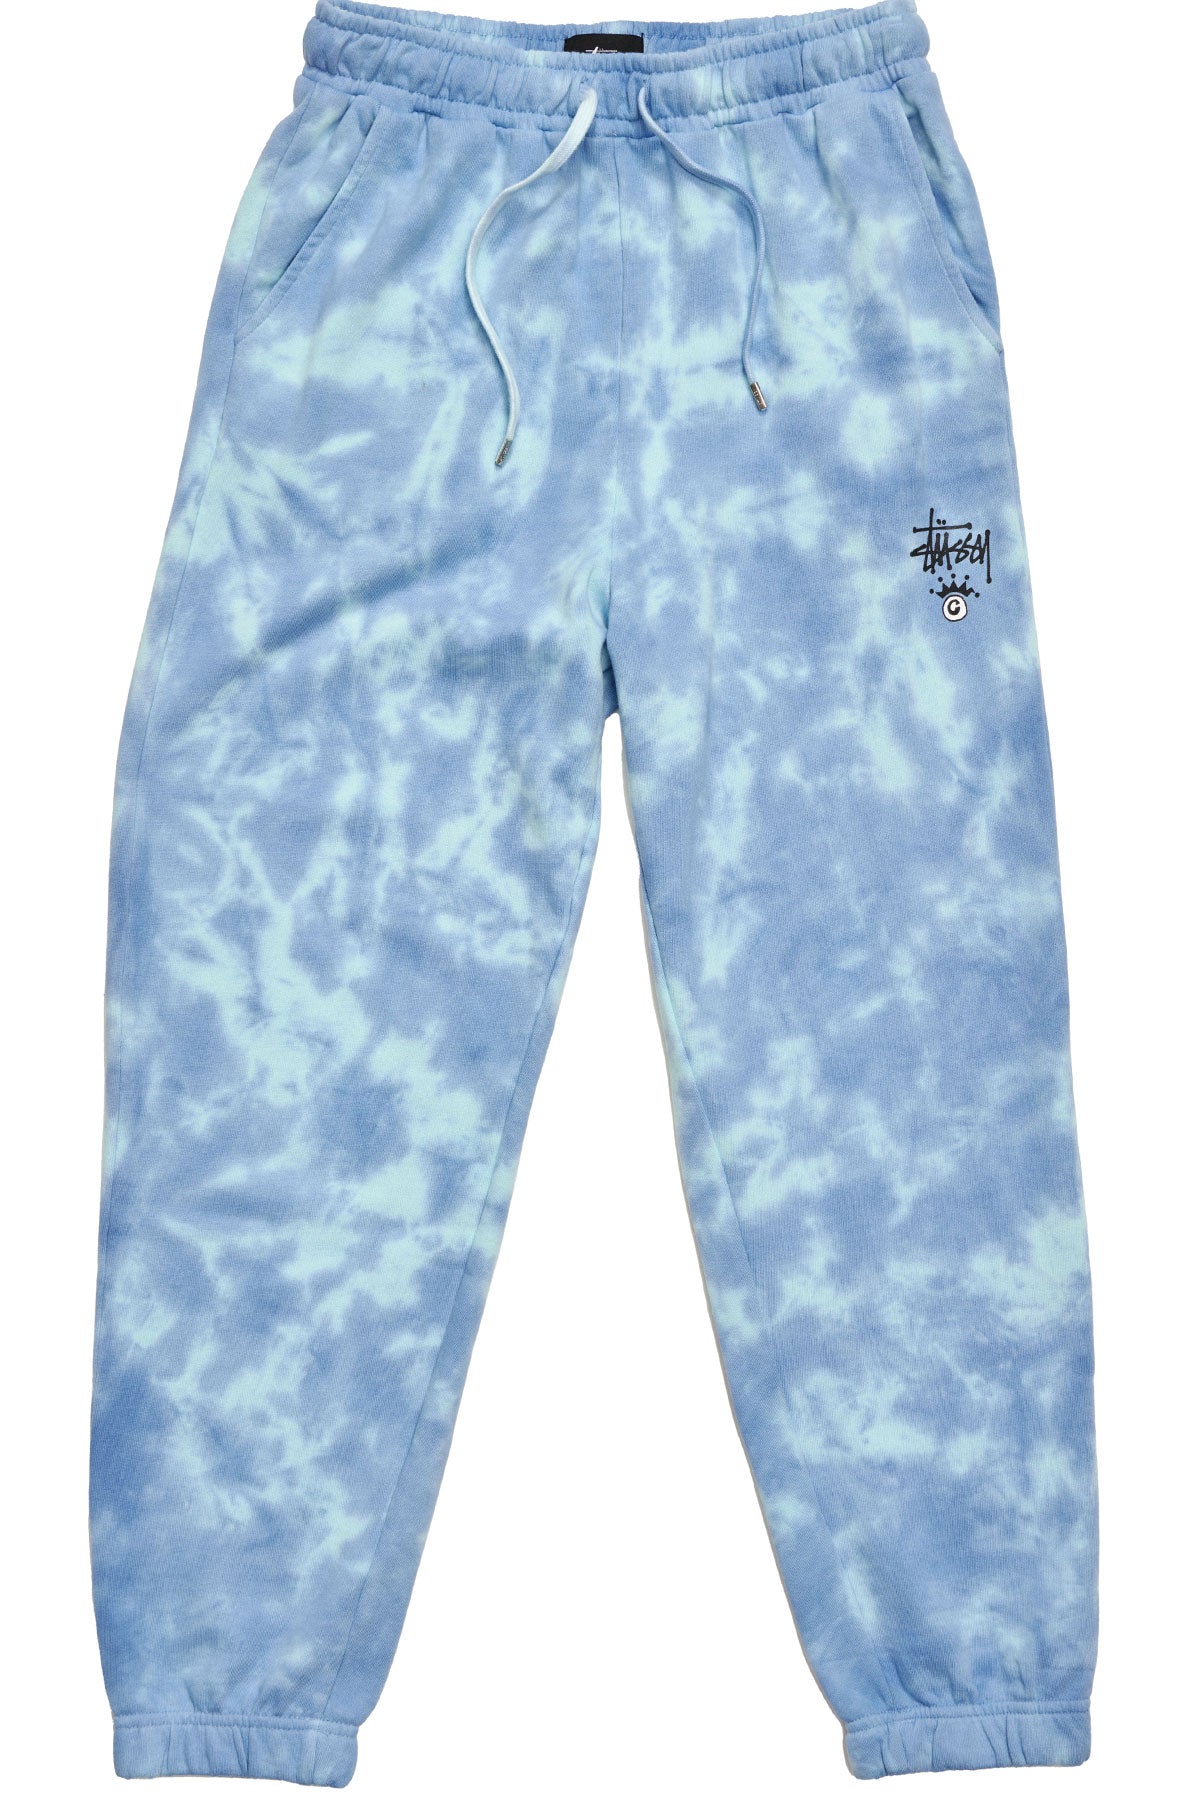 COPYRIGHT TD TRACKPANTS - Pale Blue